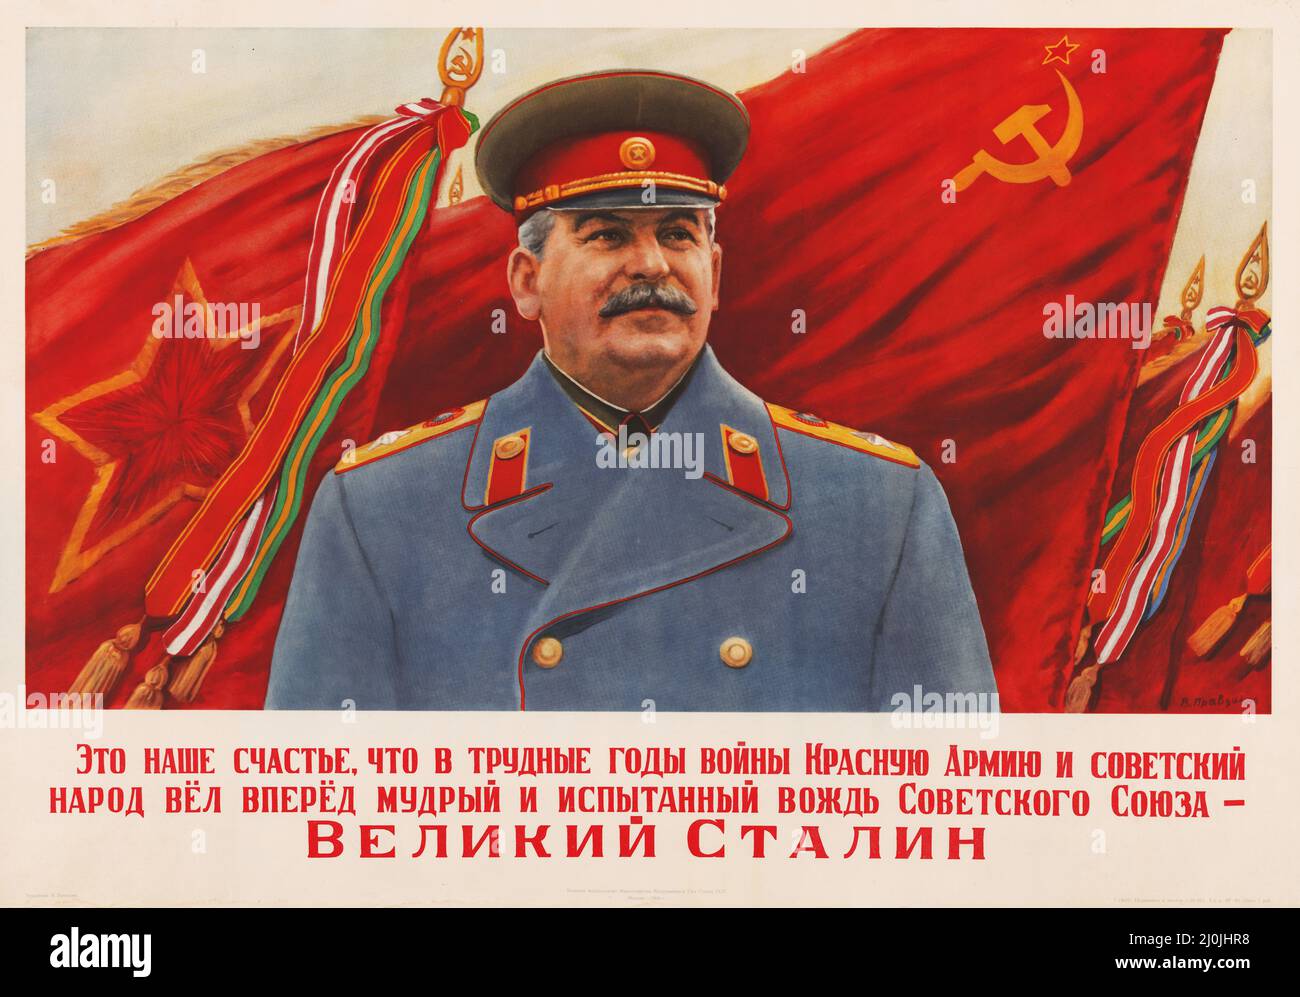 Russian propaganda - Vintage Russian poster - ”The wise and experienced leader of the Soviet Union, the Great Stalin”. 1940-1945. Stock Photo